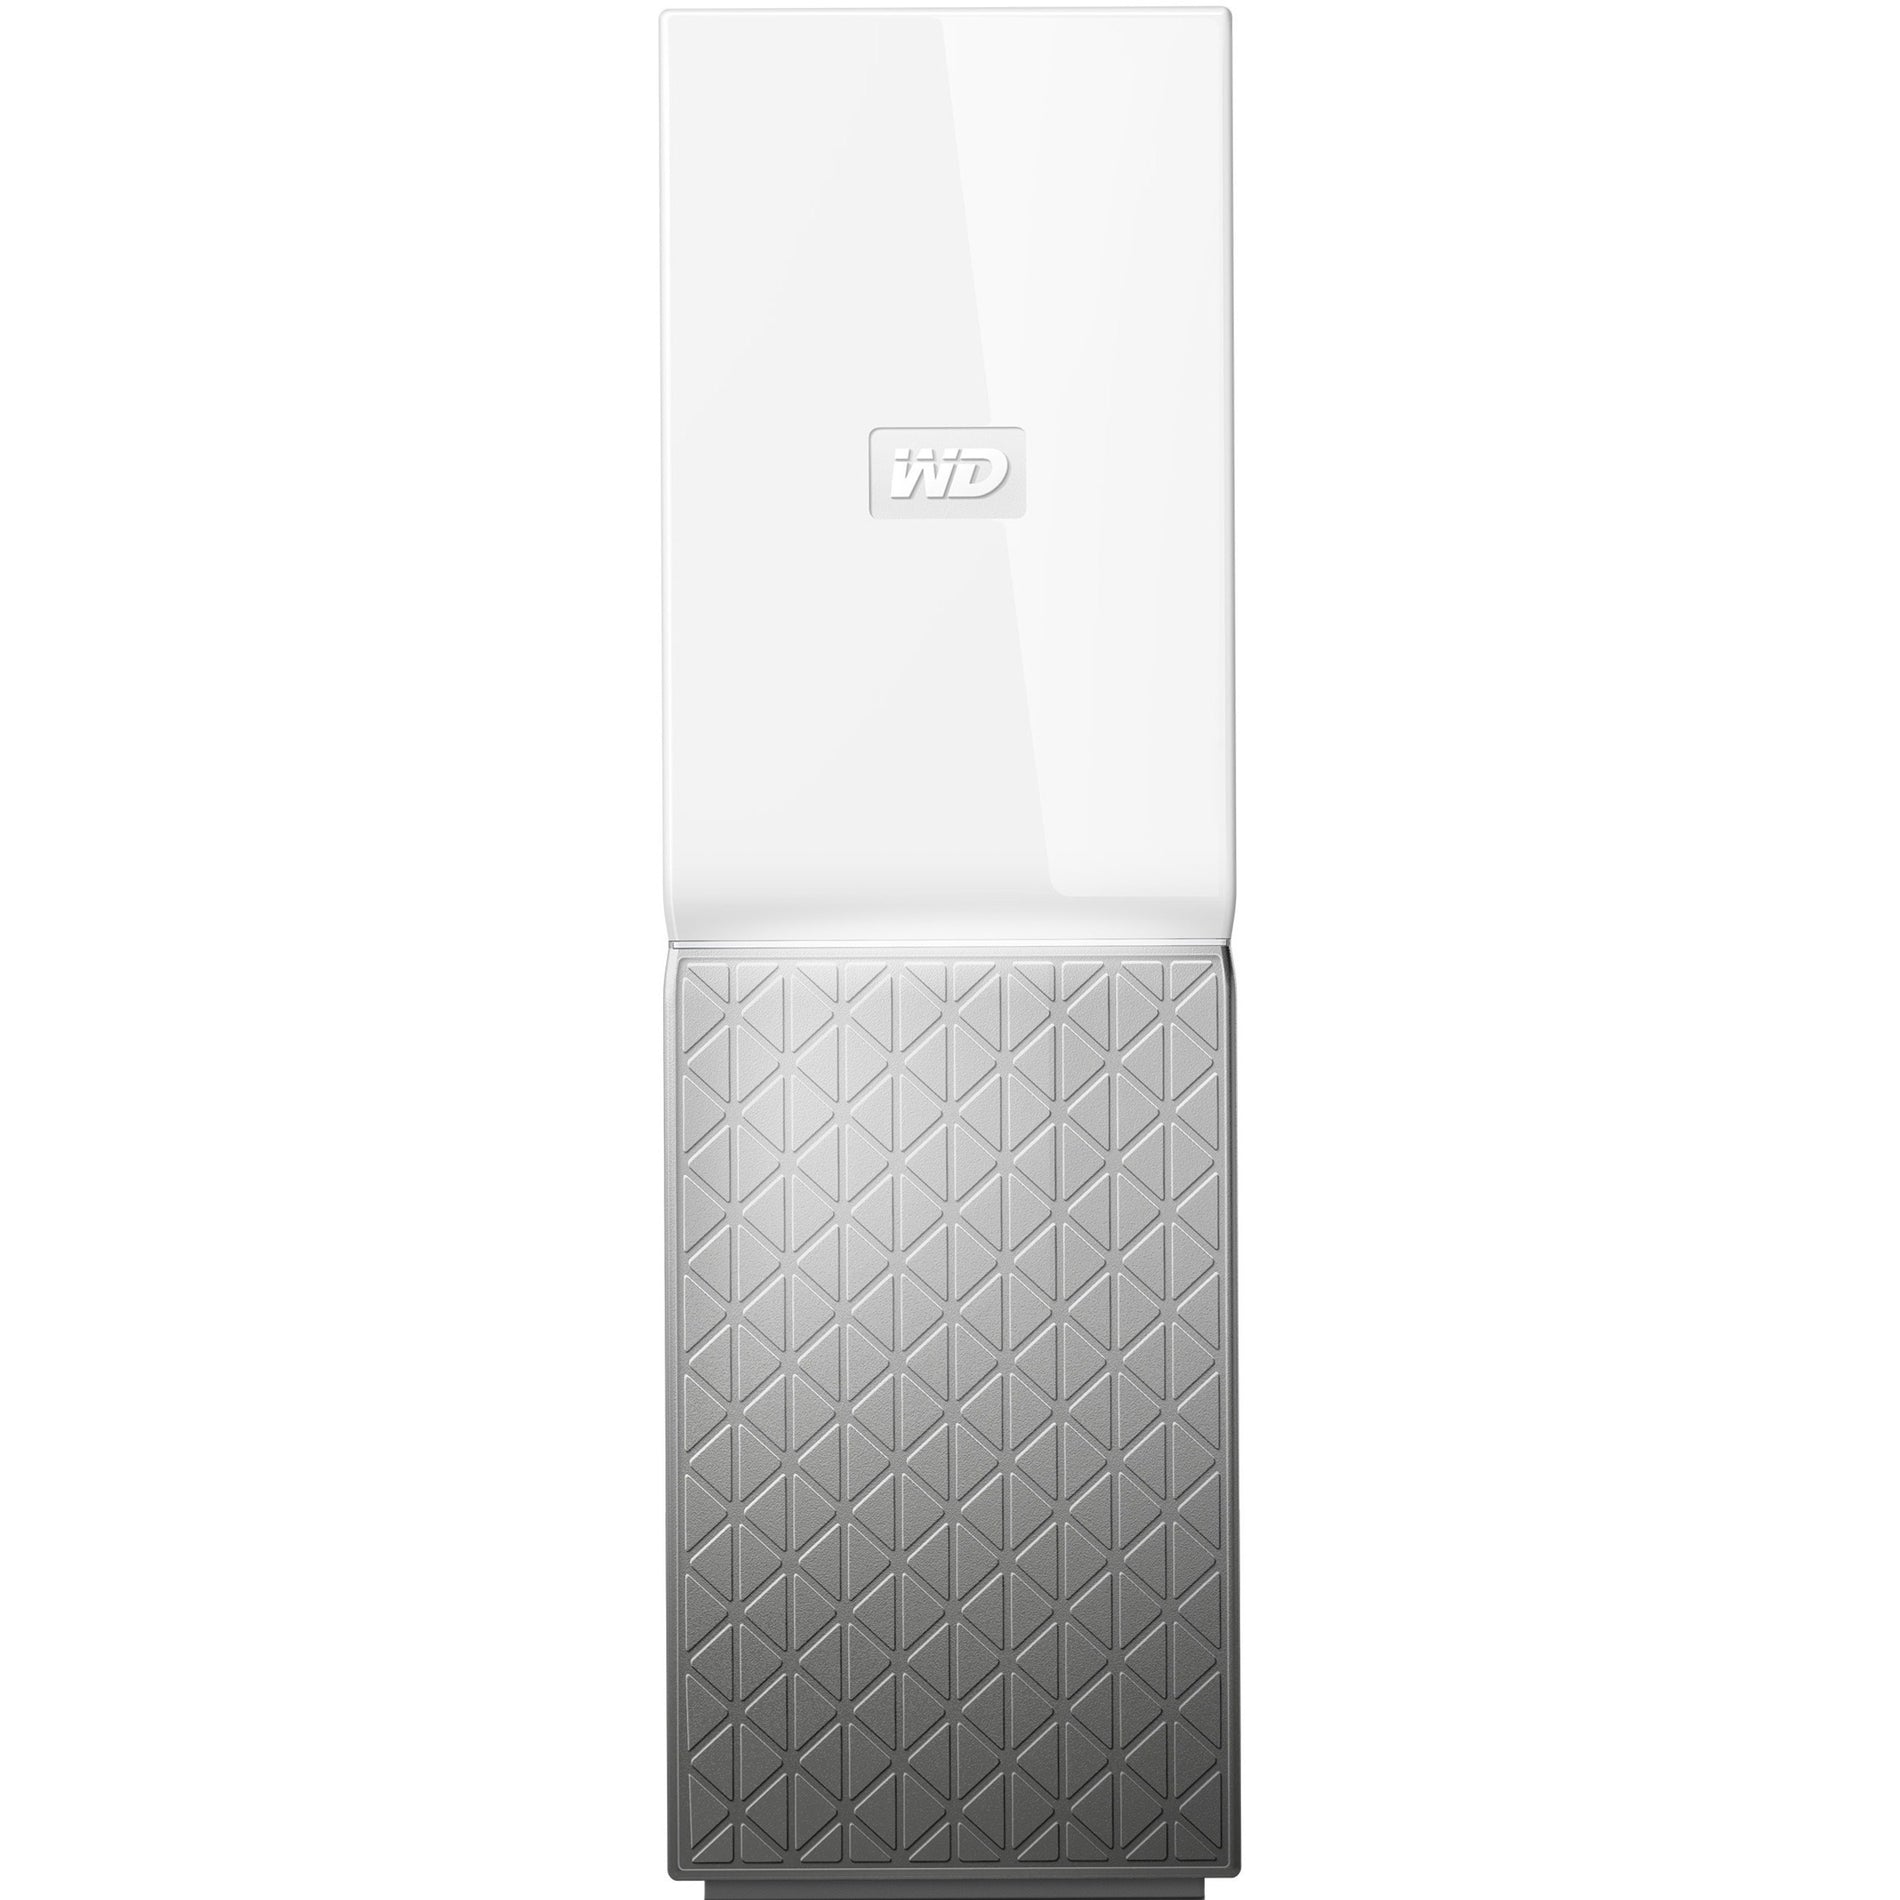 WD My Cloud Home Personal Cloud Storage (WDBVXC0040HWT-NESN) Front image